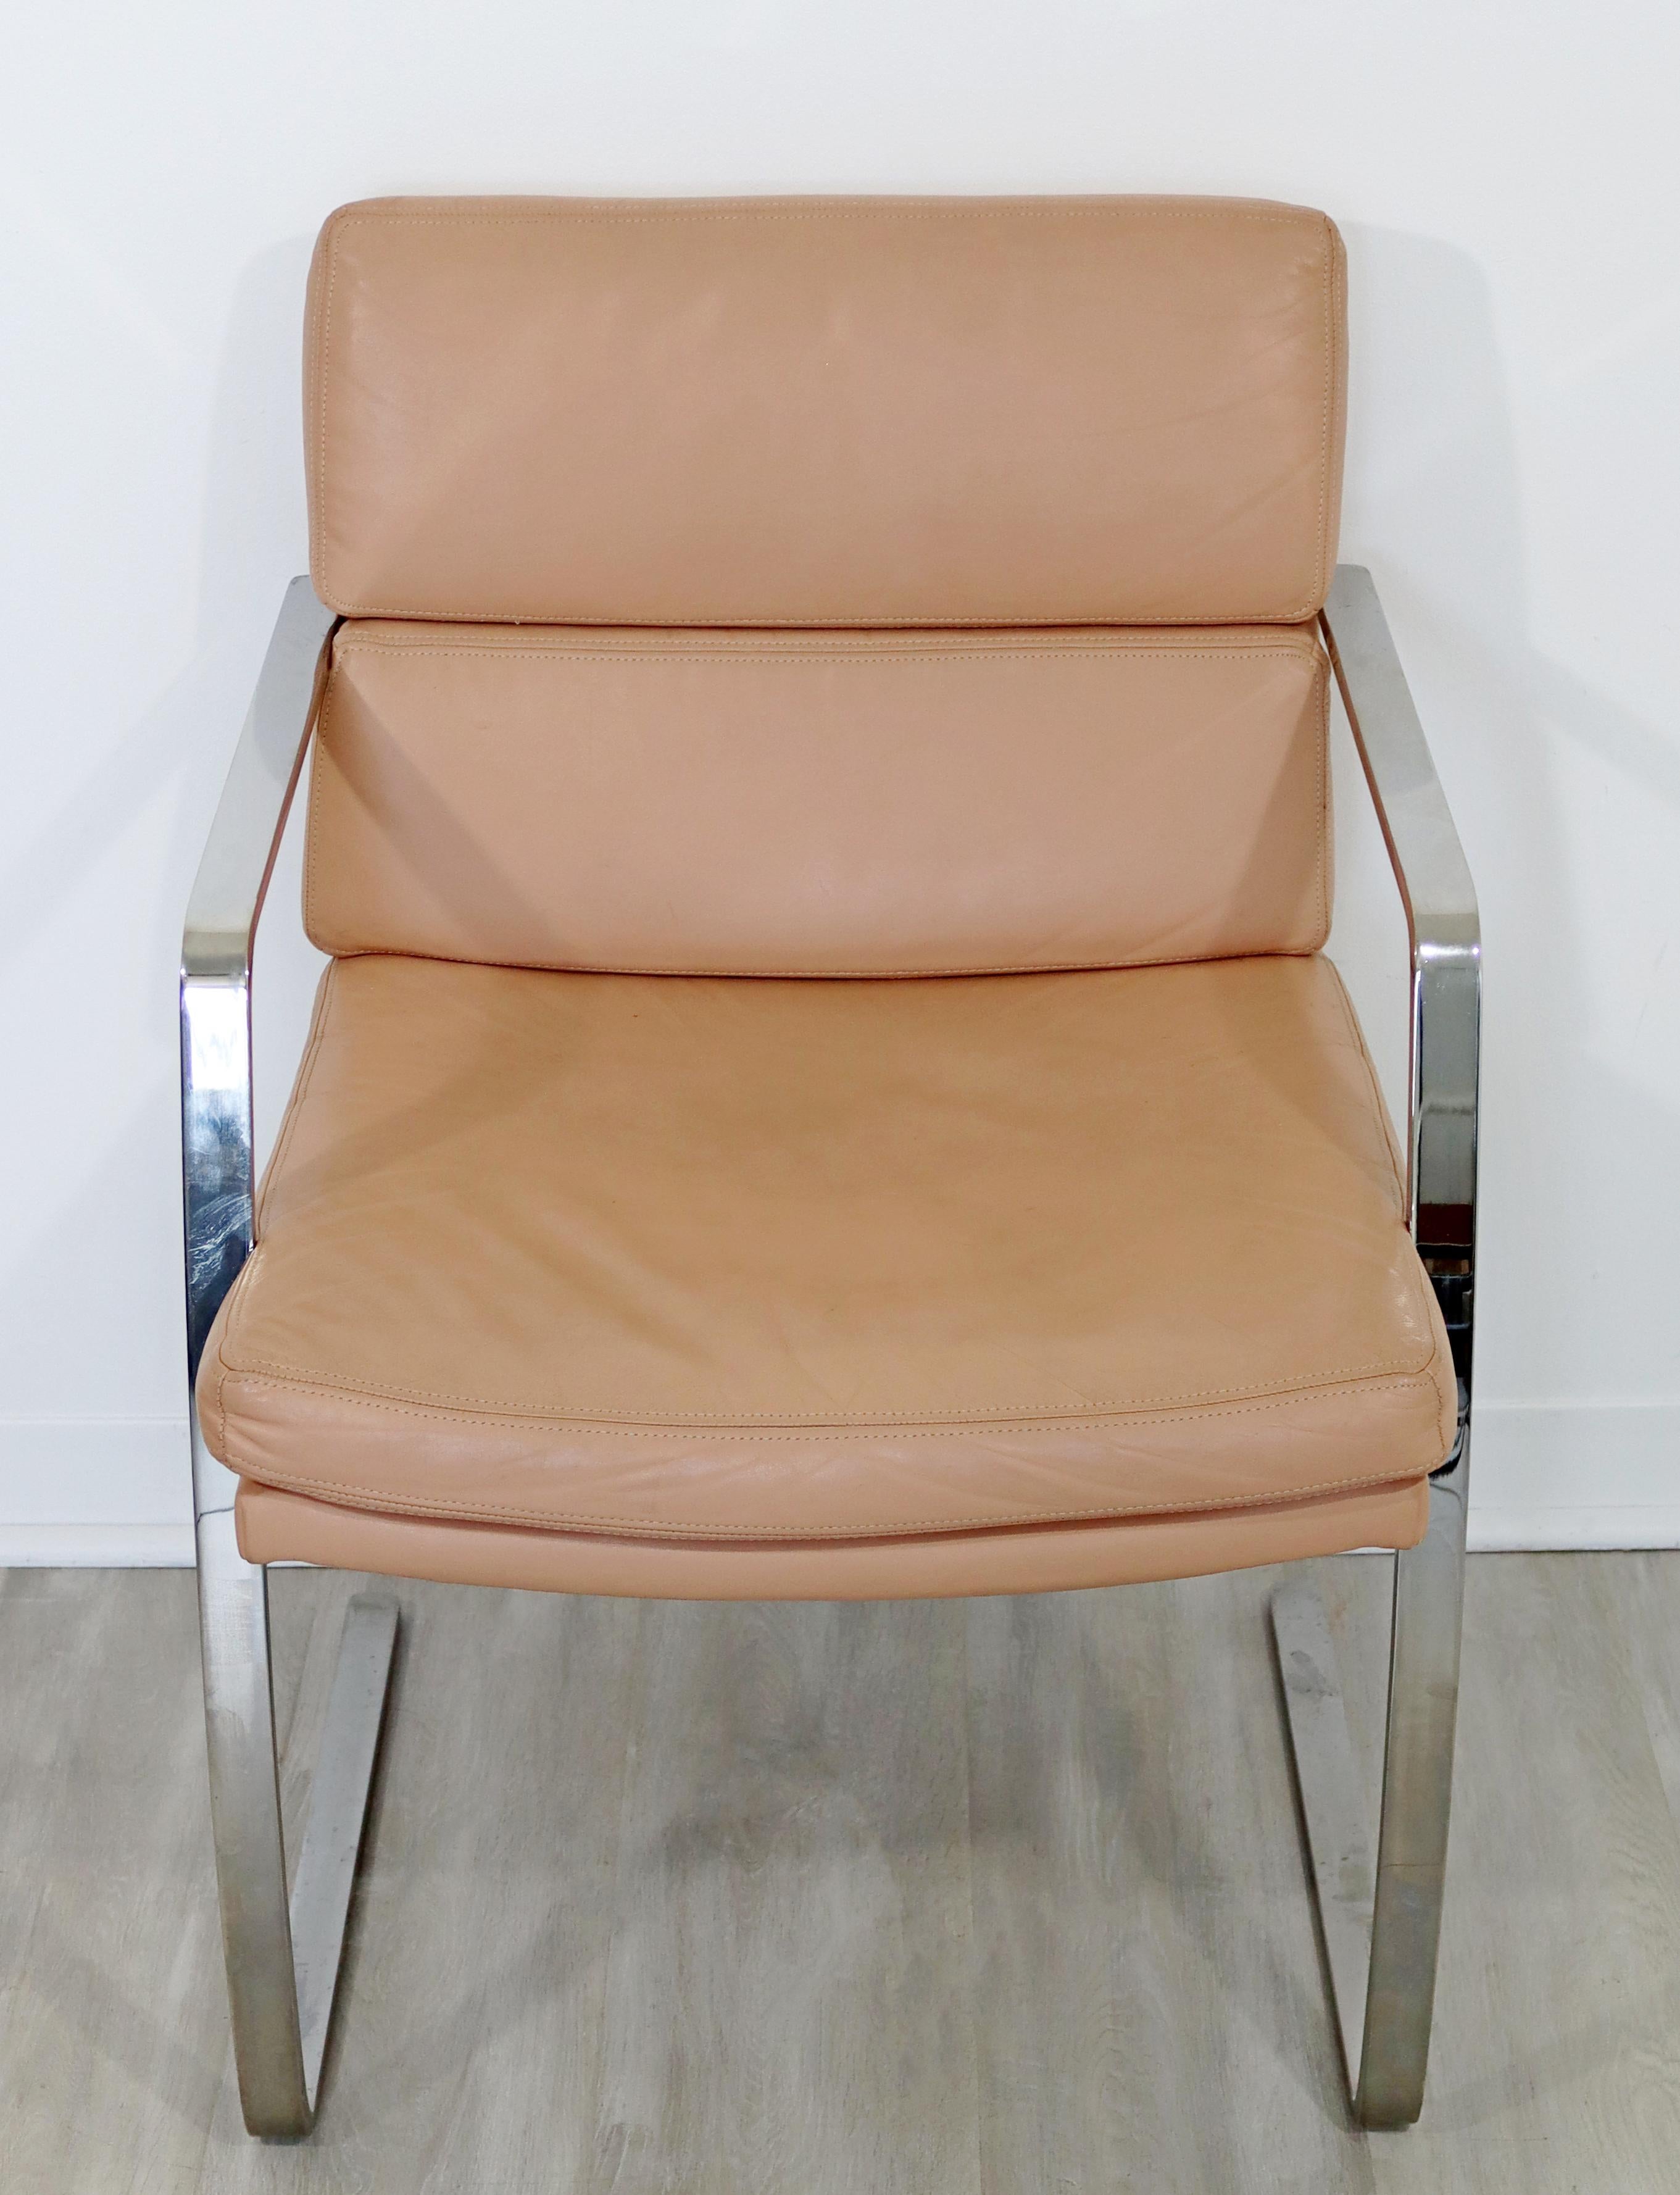 For your consideration is a phenomenal set of eight chairs, made of cantilever chrome and with peach leather upholstery, by Preview for Pace, circa the 1970s. In very good vintage condition. The dimensions are 22.5